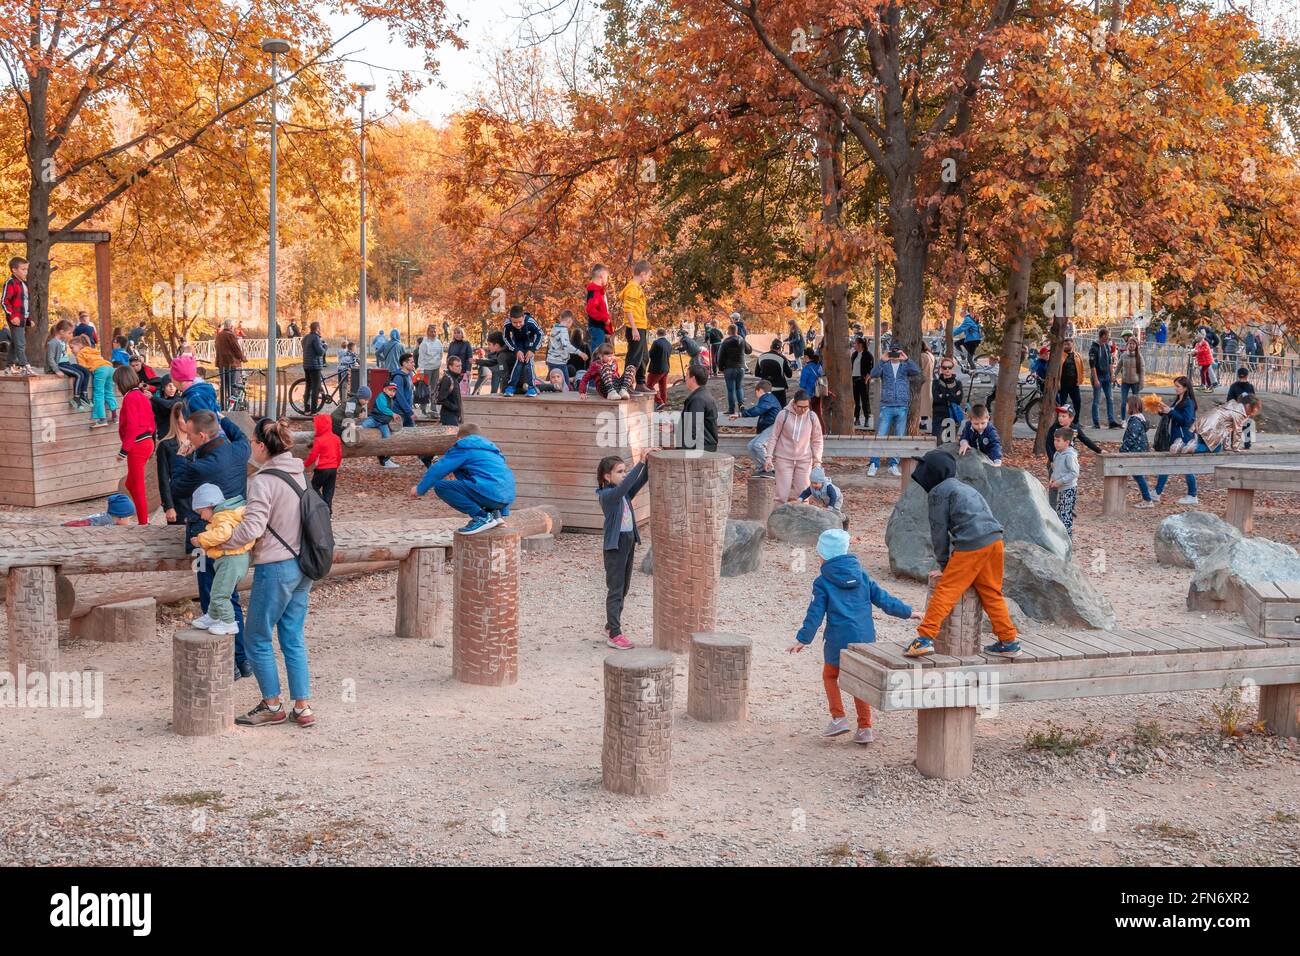 Kazan, Russia - October 03, 2020: Children under the supervision of their parents play on the playground in the city's public park on an autumn sunny Stock Photo